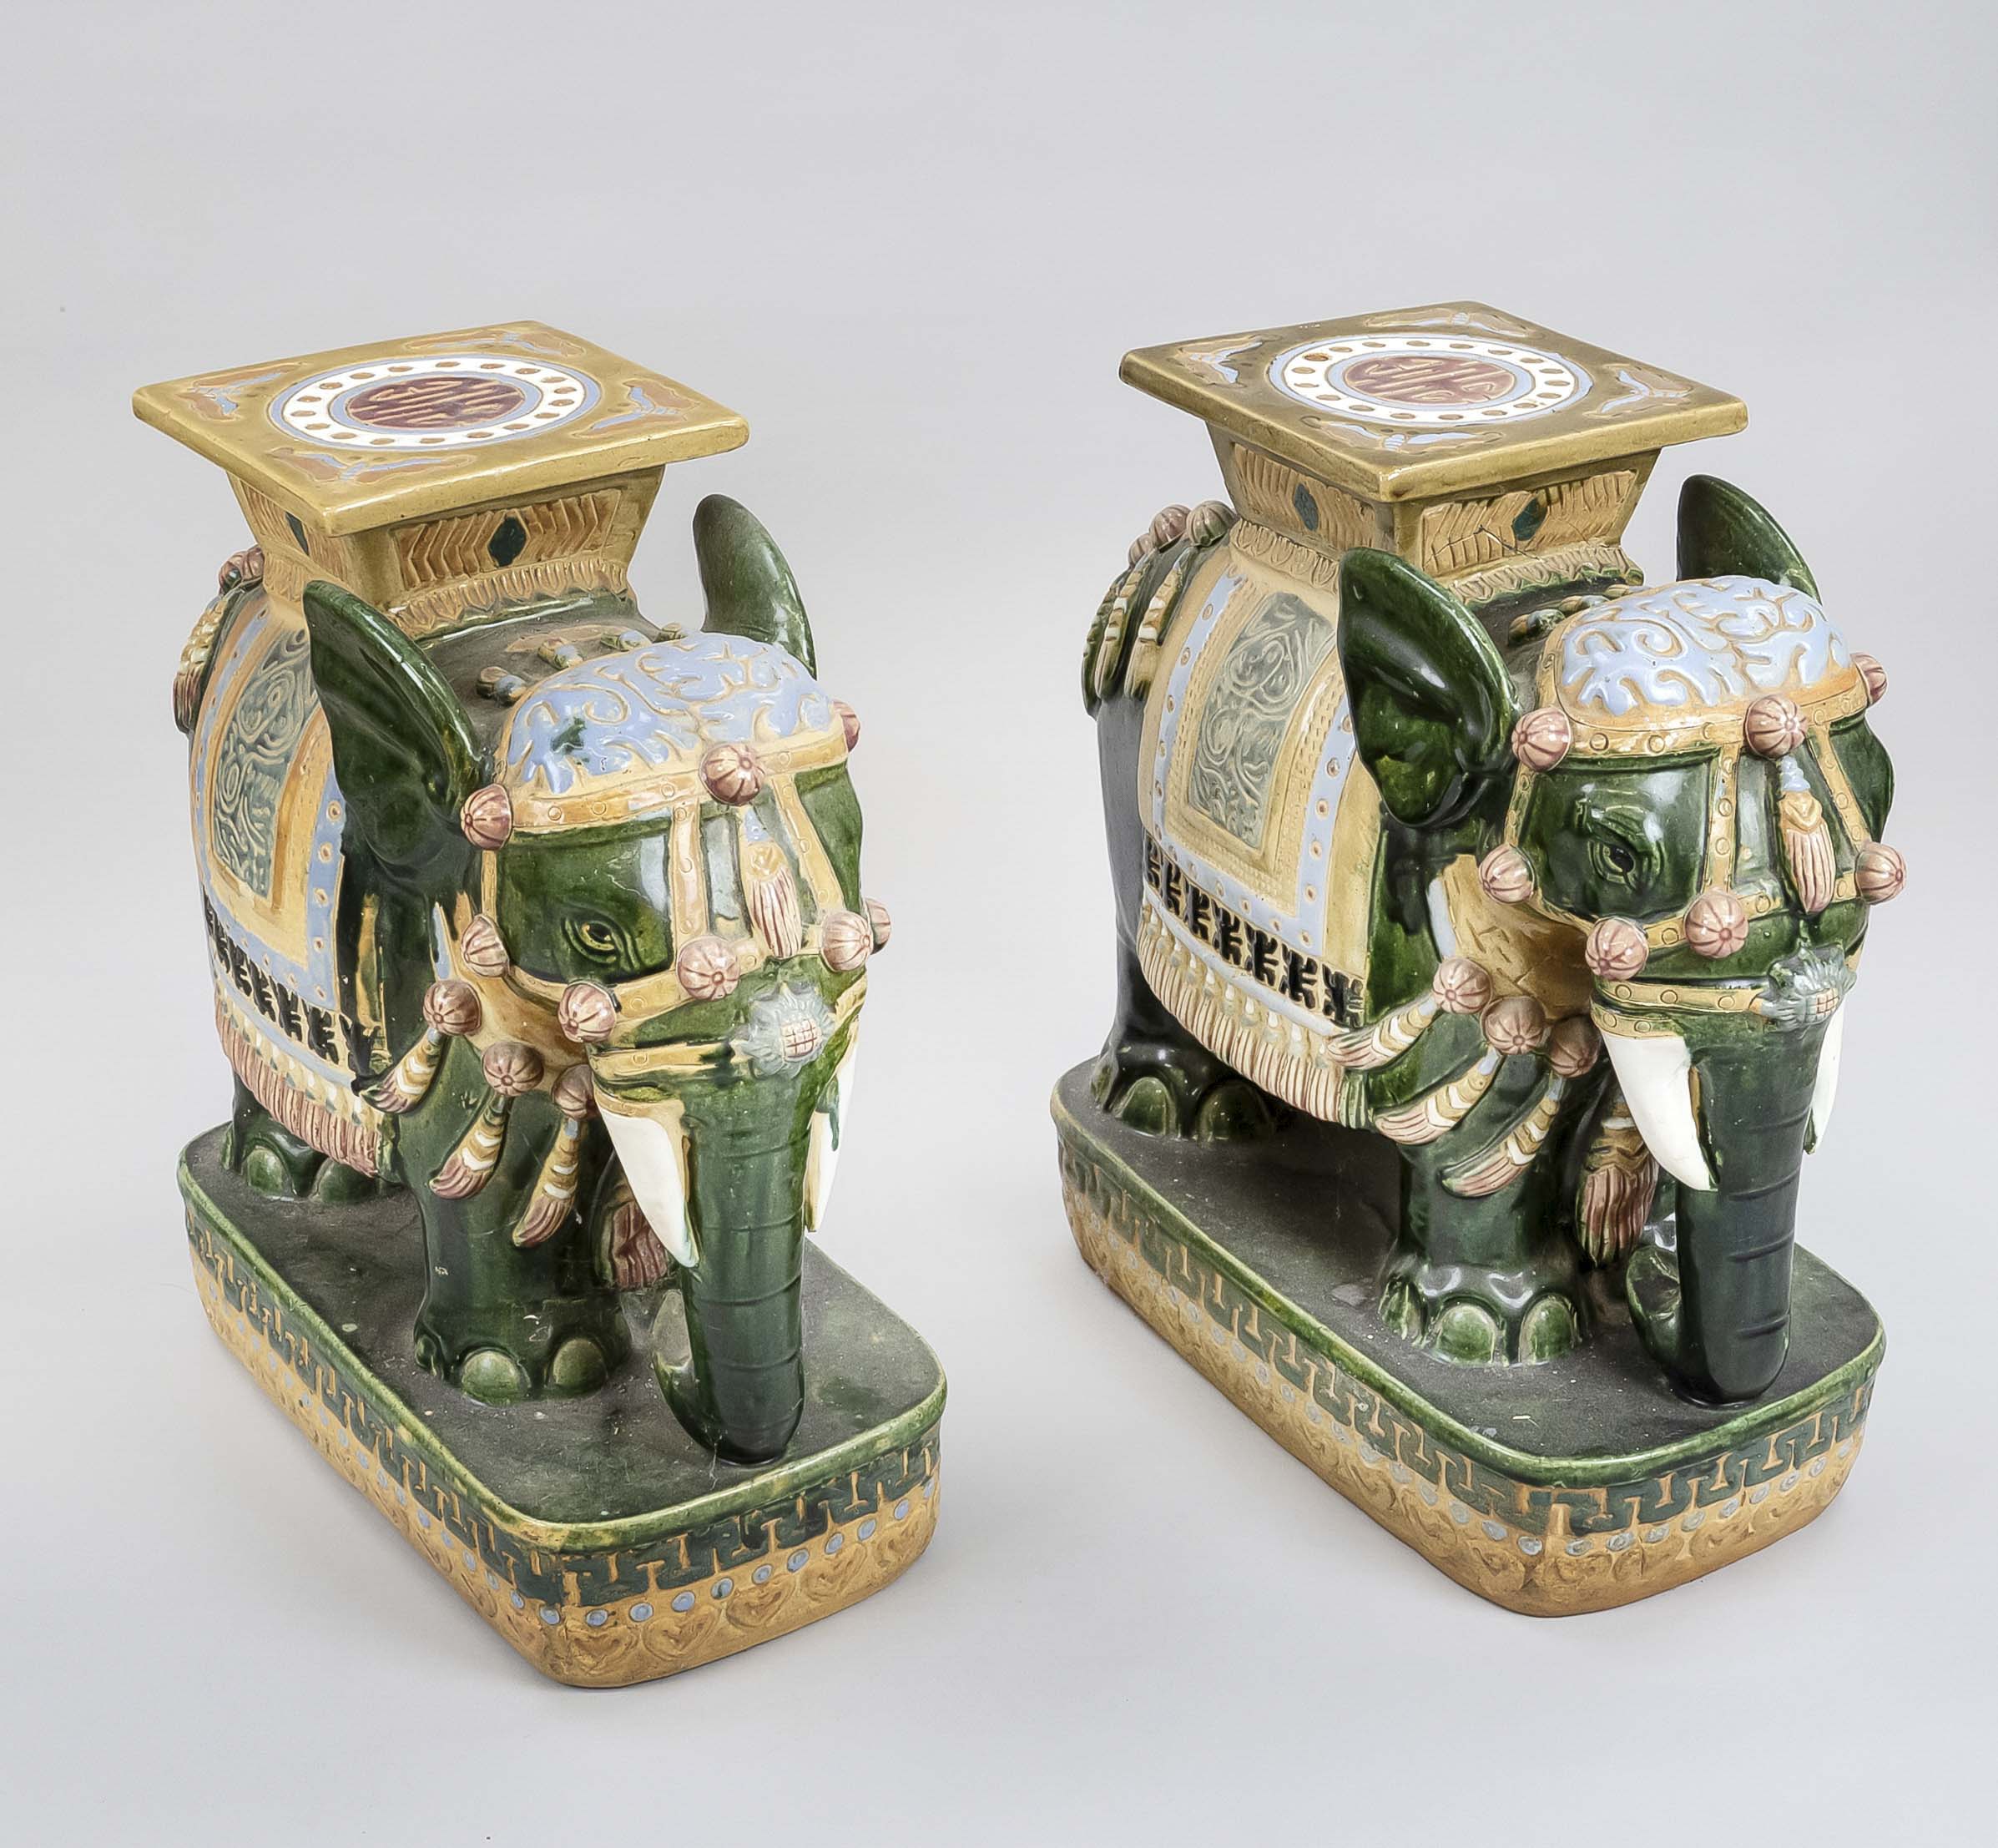 Pair of elephant flower stools, India or Nepal, 20th century, terracotta in the shape of a mighty